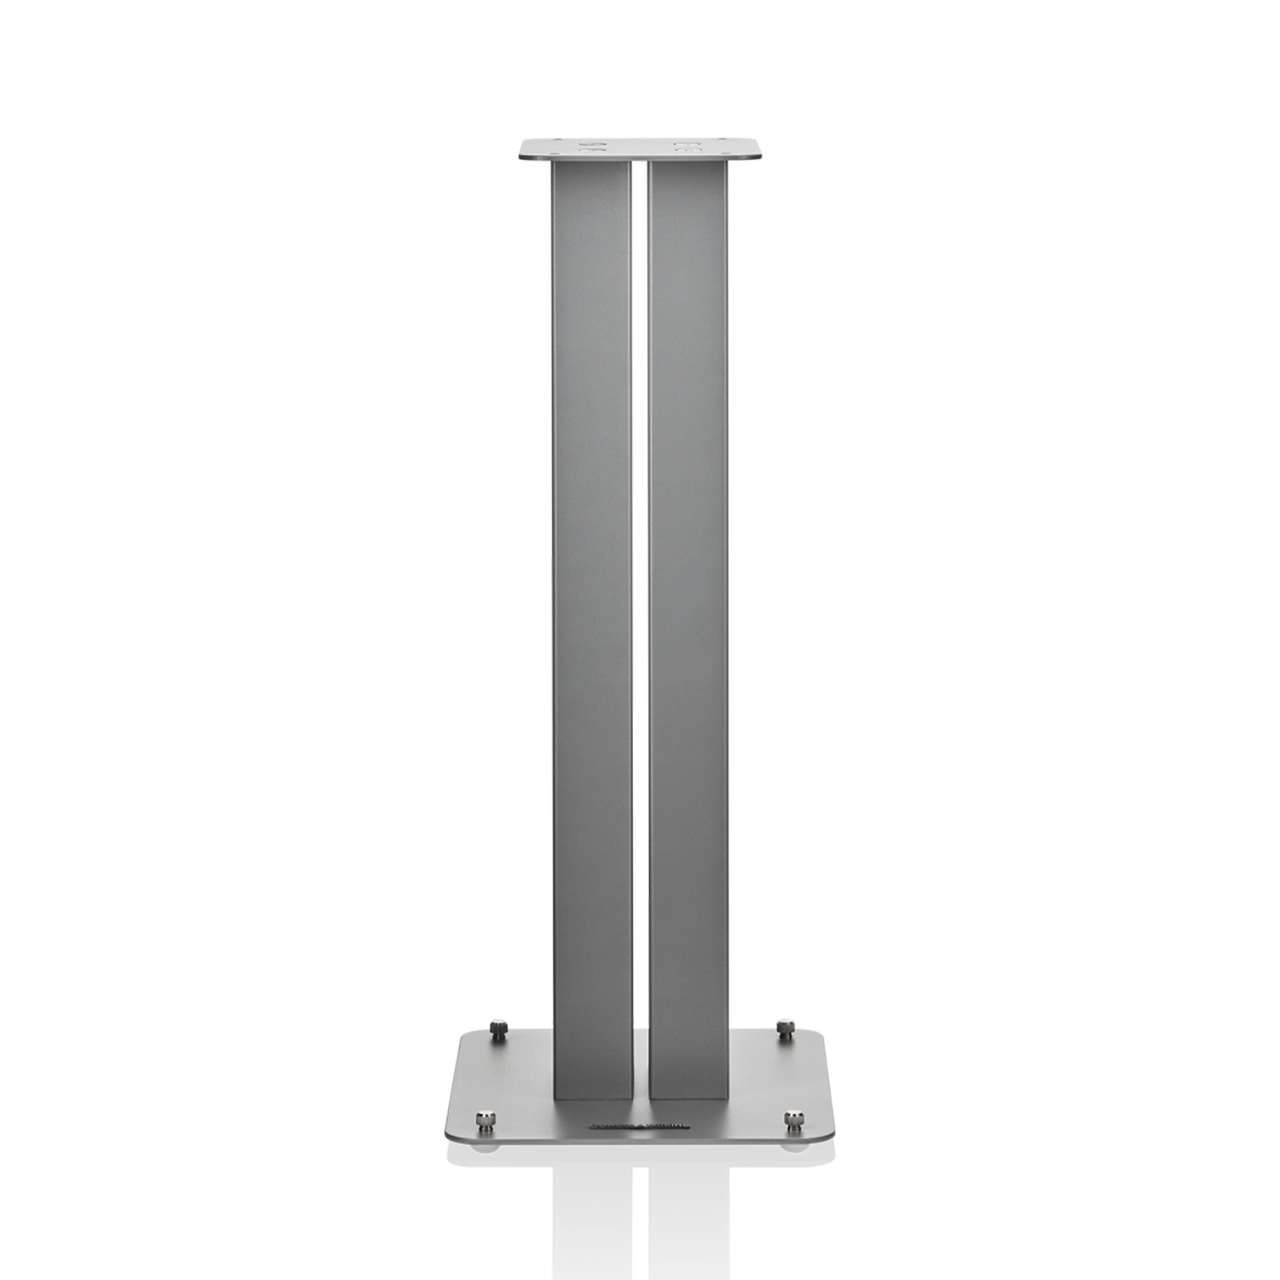 Bowers & Wilkins FS-600 S3 ( Stands for 600 S3 series)